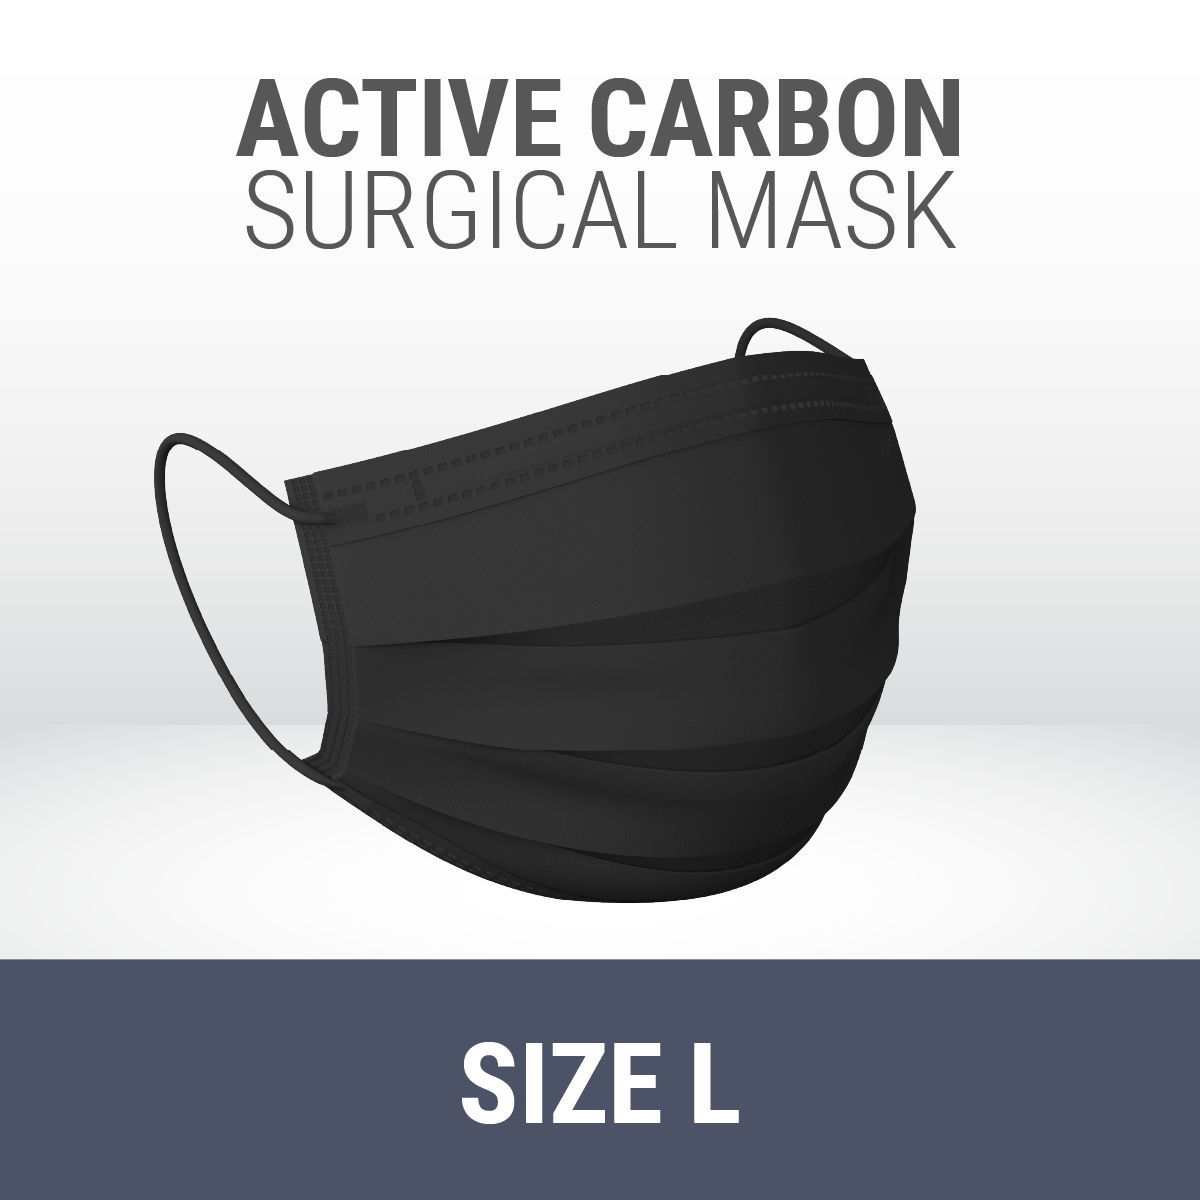 Surgical Mask with Active Carbon [5pc]